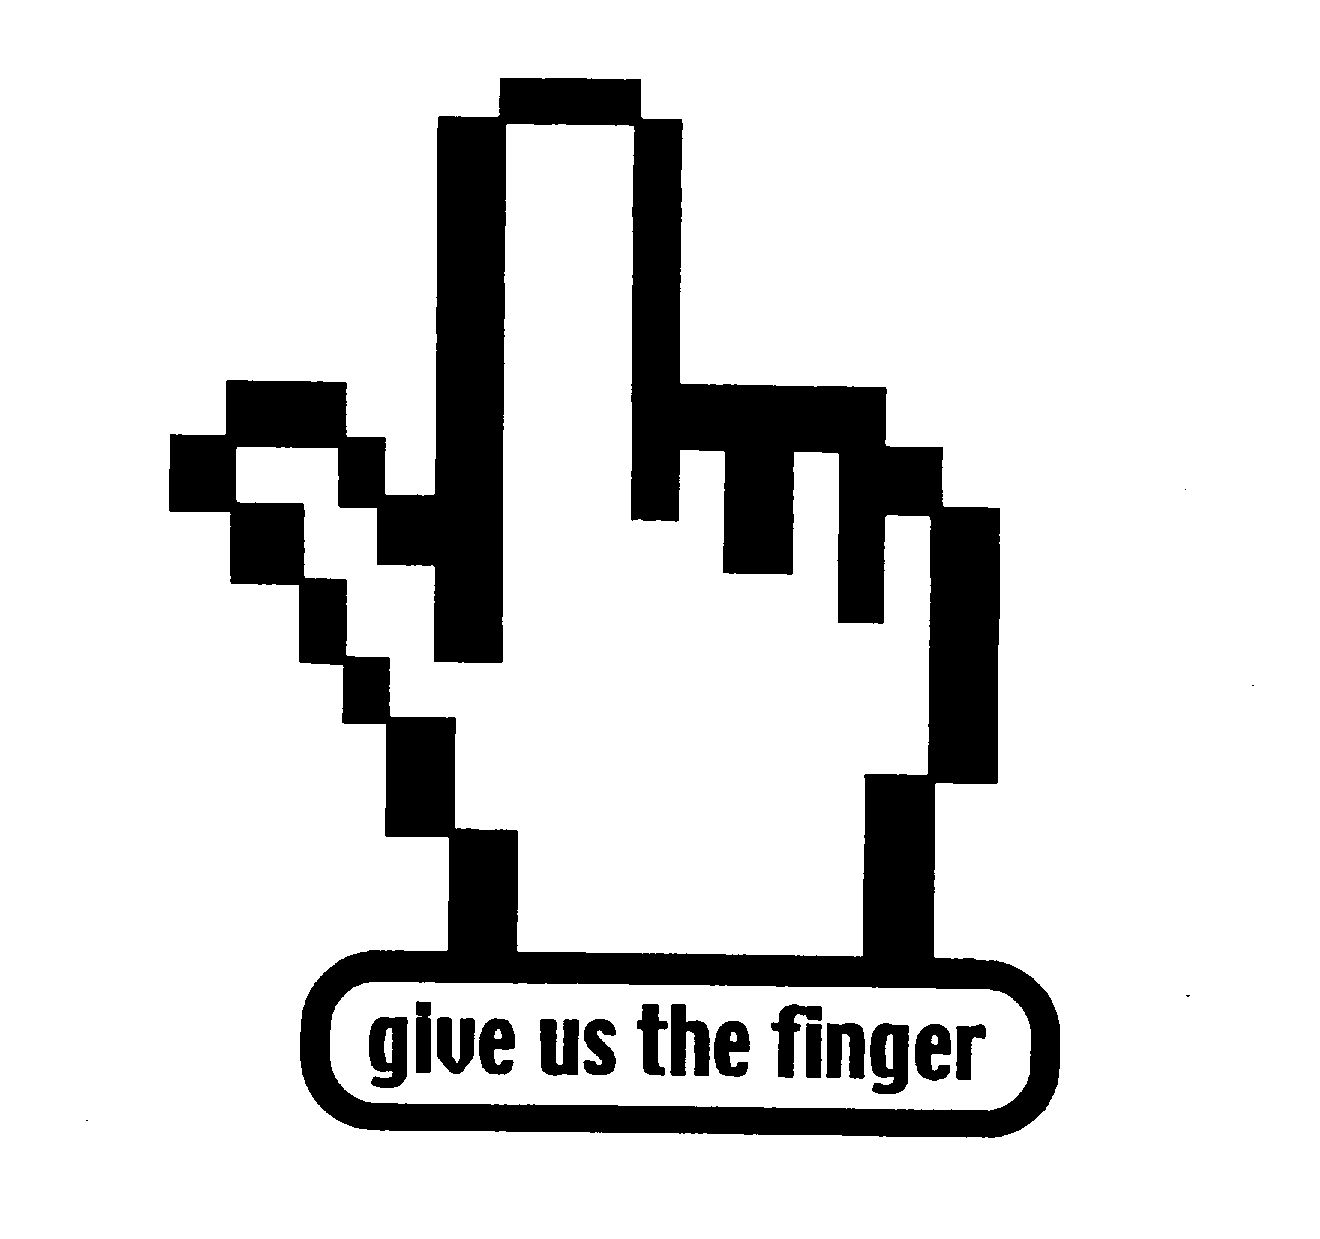  GIVE US THE FINGER